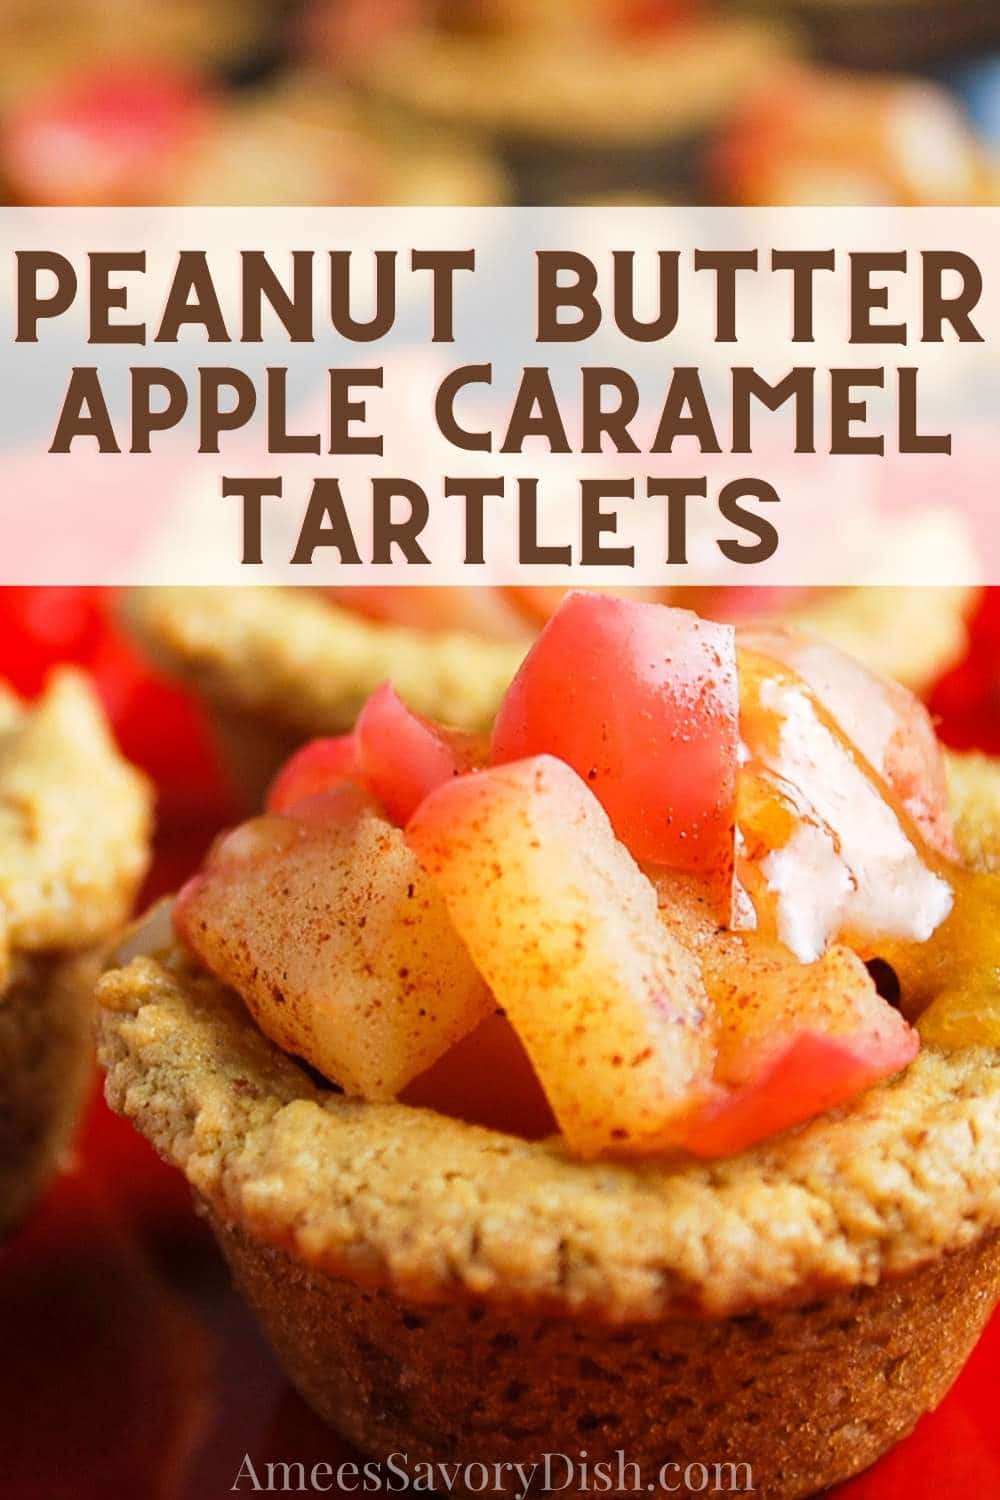 Peanut Butter Apple Caramel Tartlets! Gluten-free bite-sized tarts made with peanut butter and oat pastry, filled with cooked apples and topped with a quick maple-caramel drizzle. via @Ameessavorydish